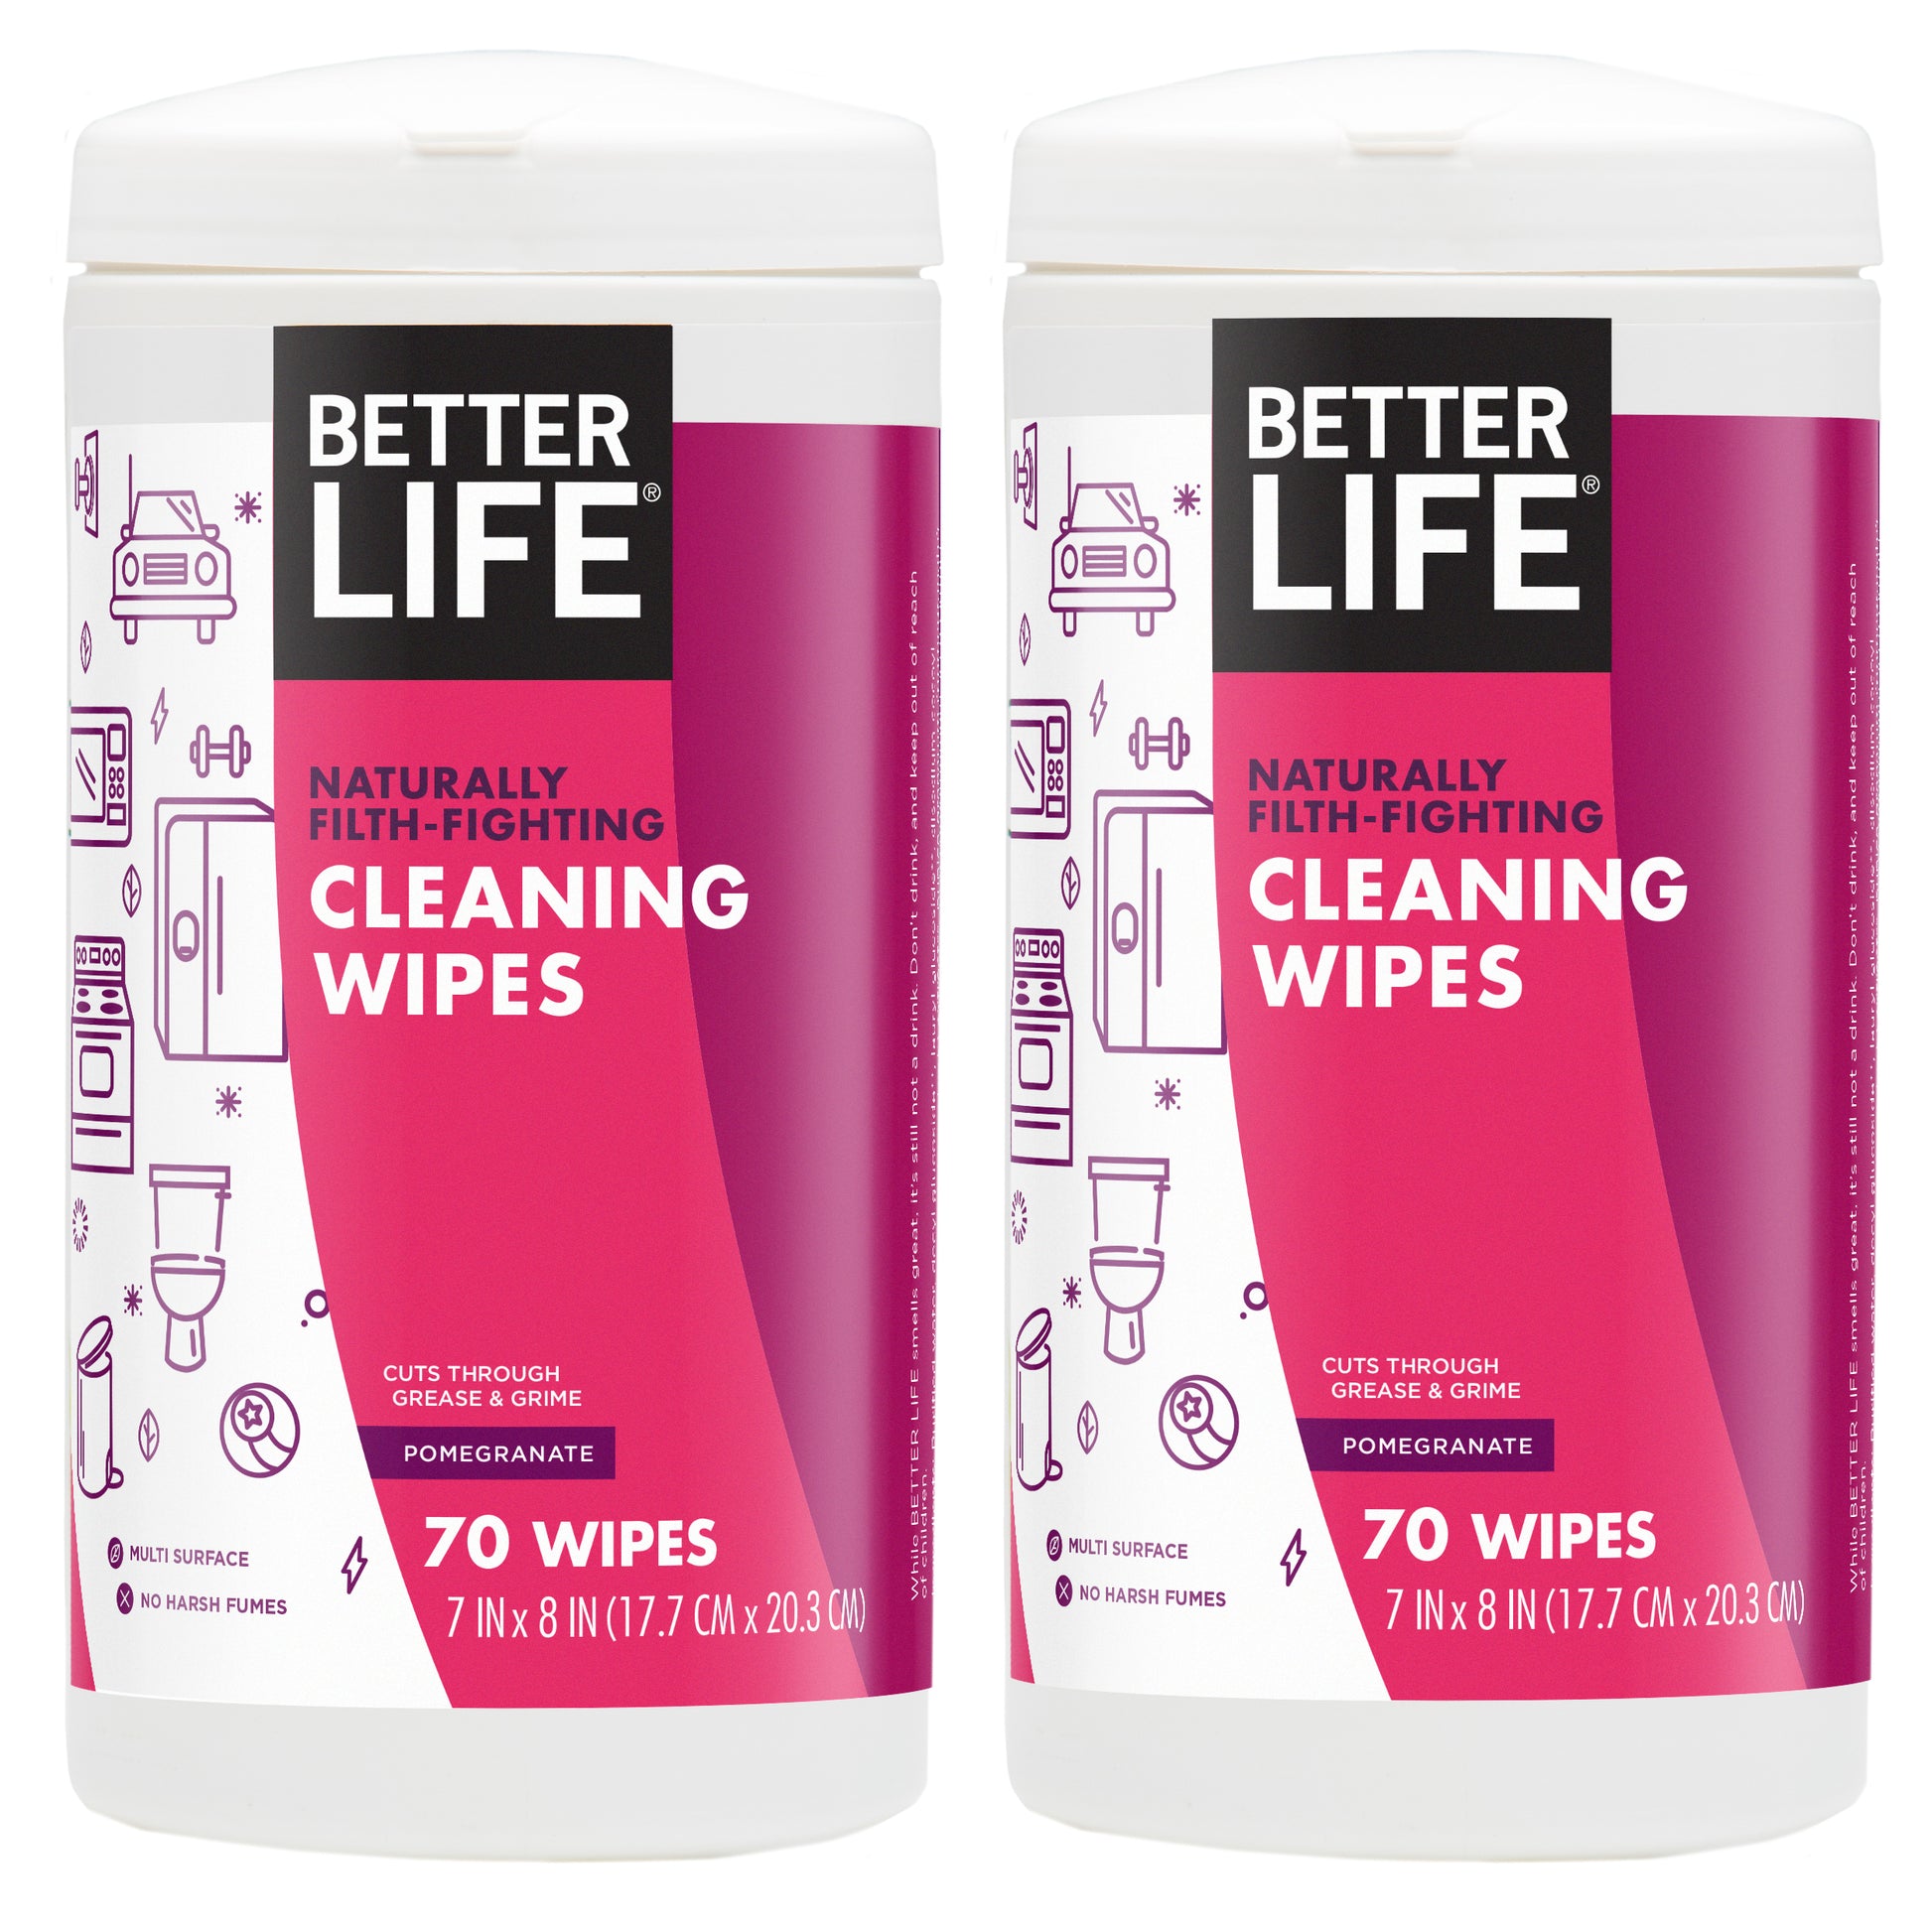 Better Life cleaning wipes - Pomegranate - Pack of 2